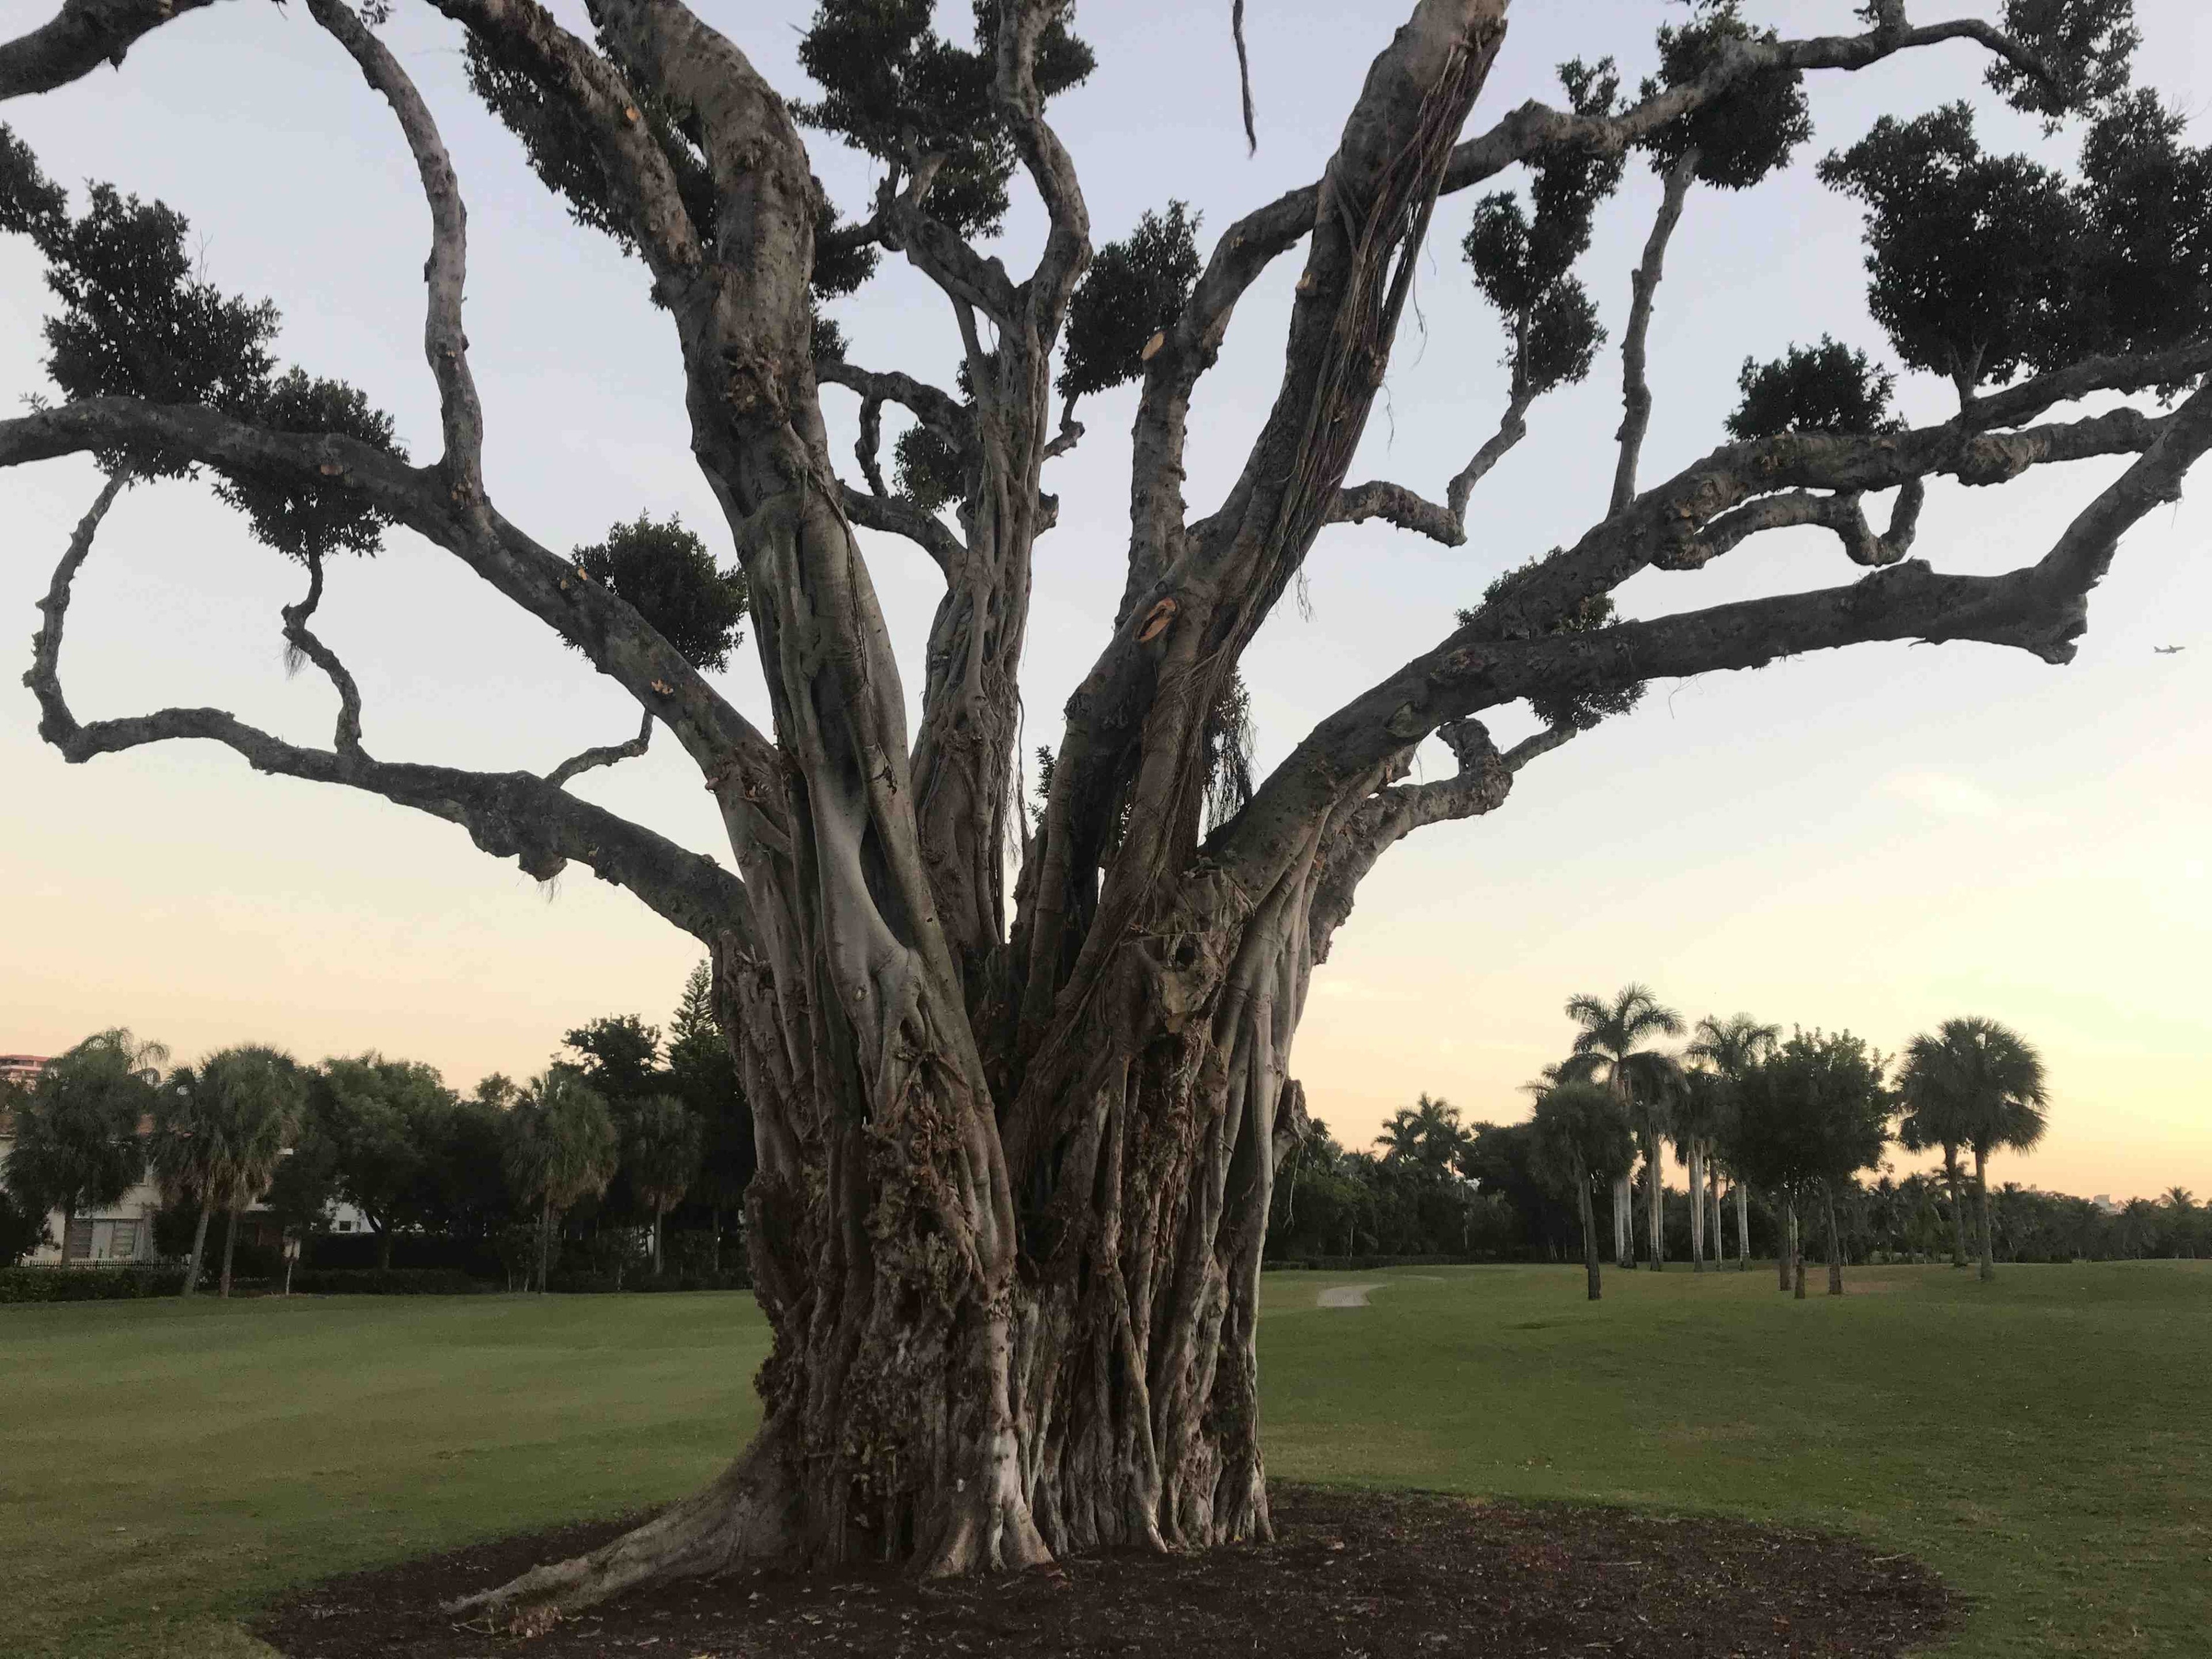 This old Banyan tree has seen a round or two of golf! Beautiful.